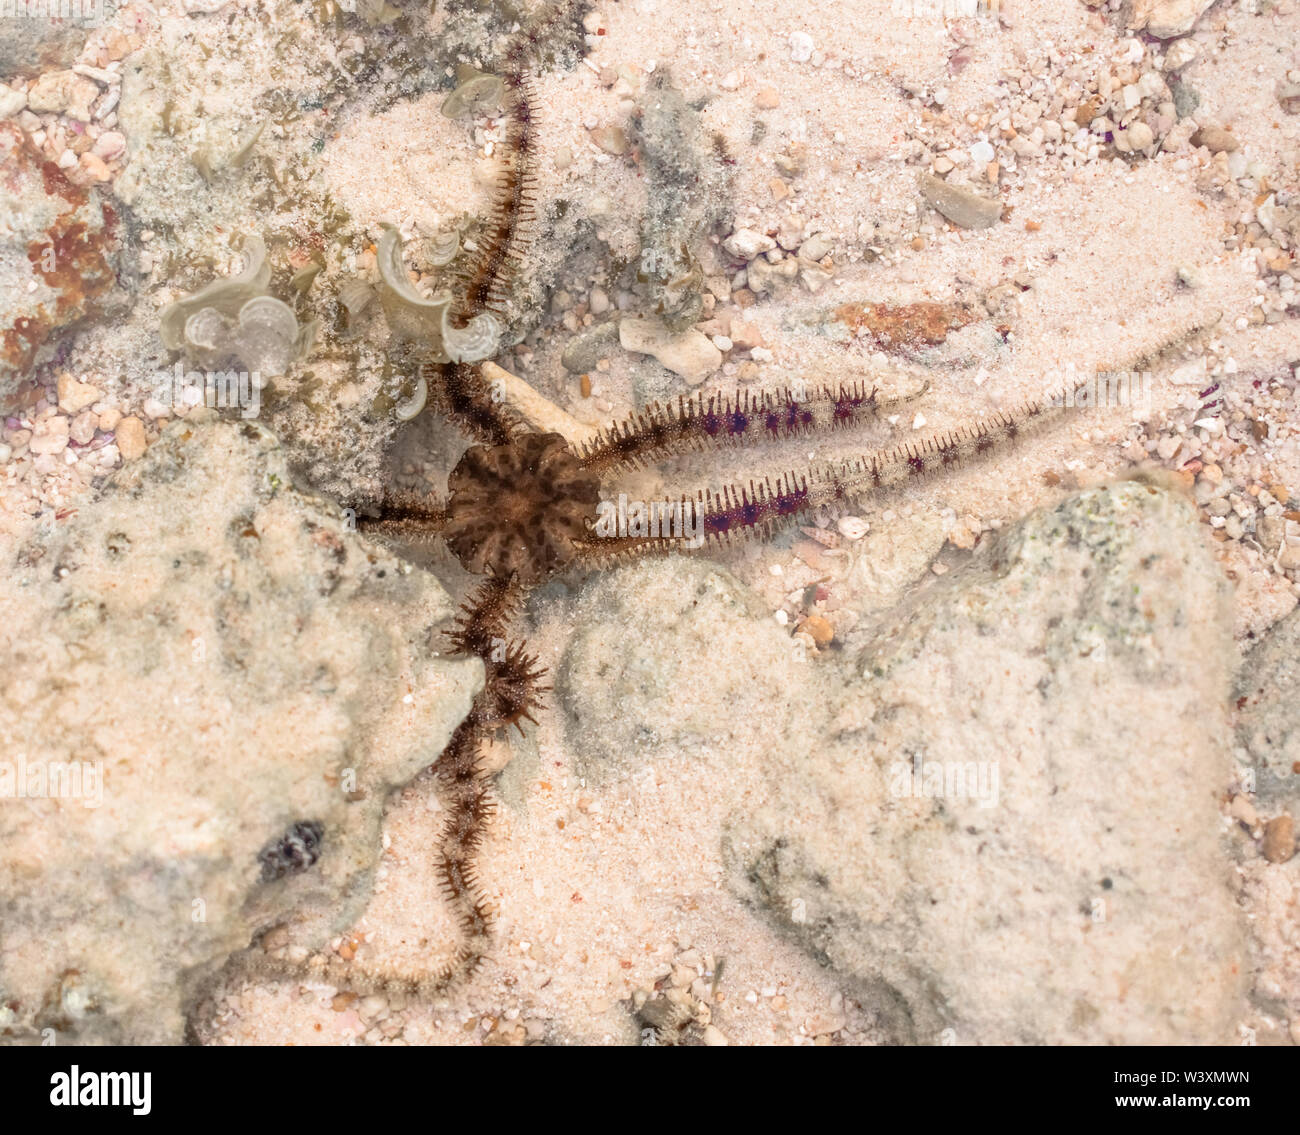 Scientific ID : Ophiocoma echinata (Spiny ophiocoma). Photo taken underwater of the Brittle sea Star while in locomotion in its natural habitat. Stock Photo